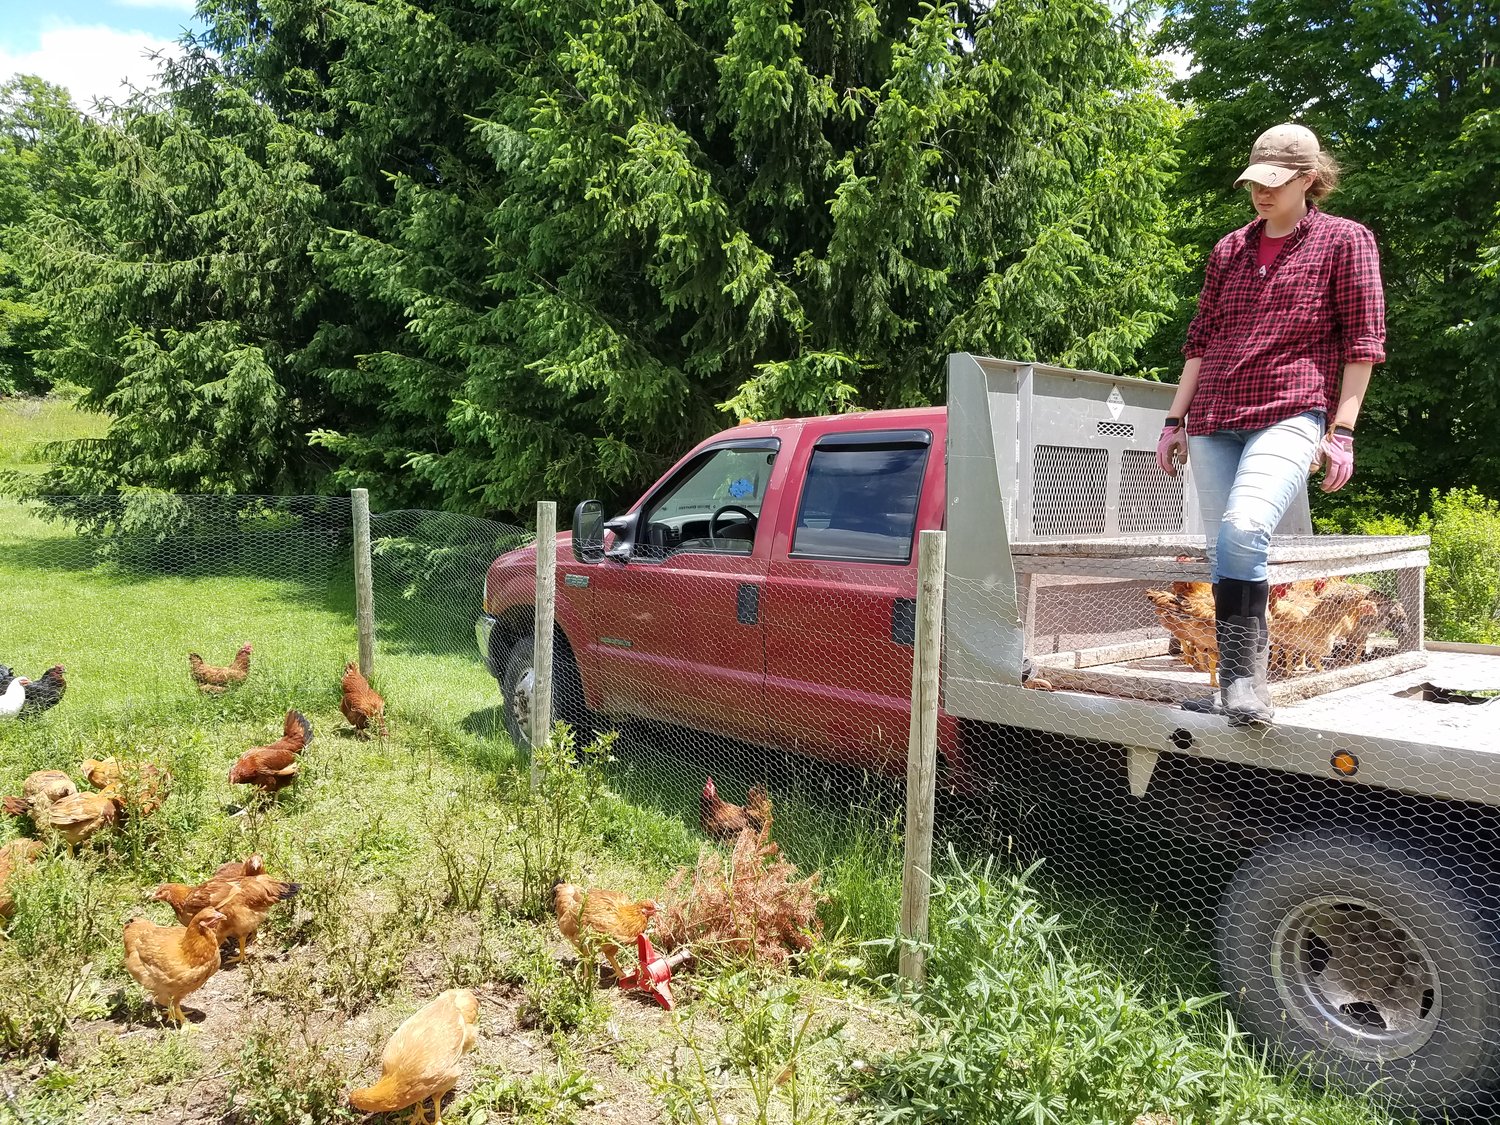 My wife Chelsea surveying our winged livestock as we load the truck to harvest our chickens.